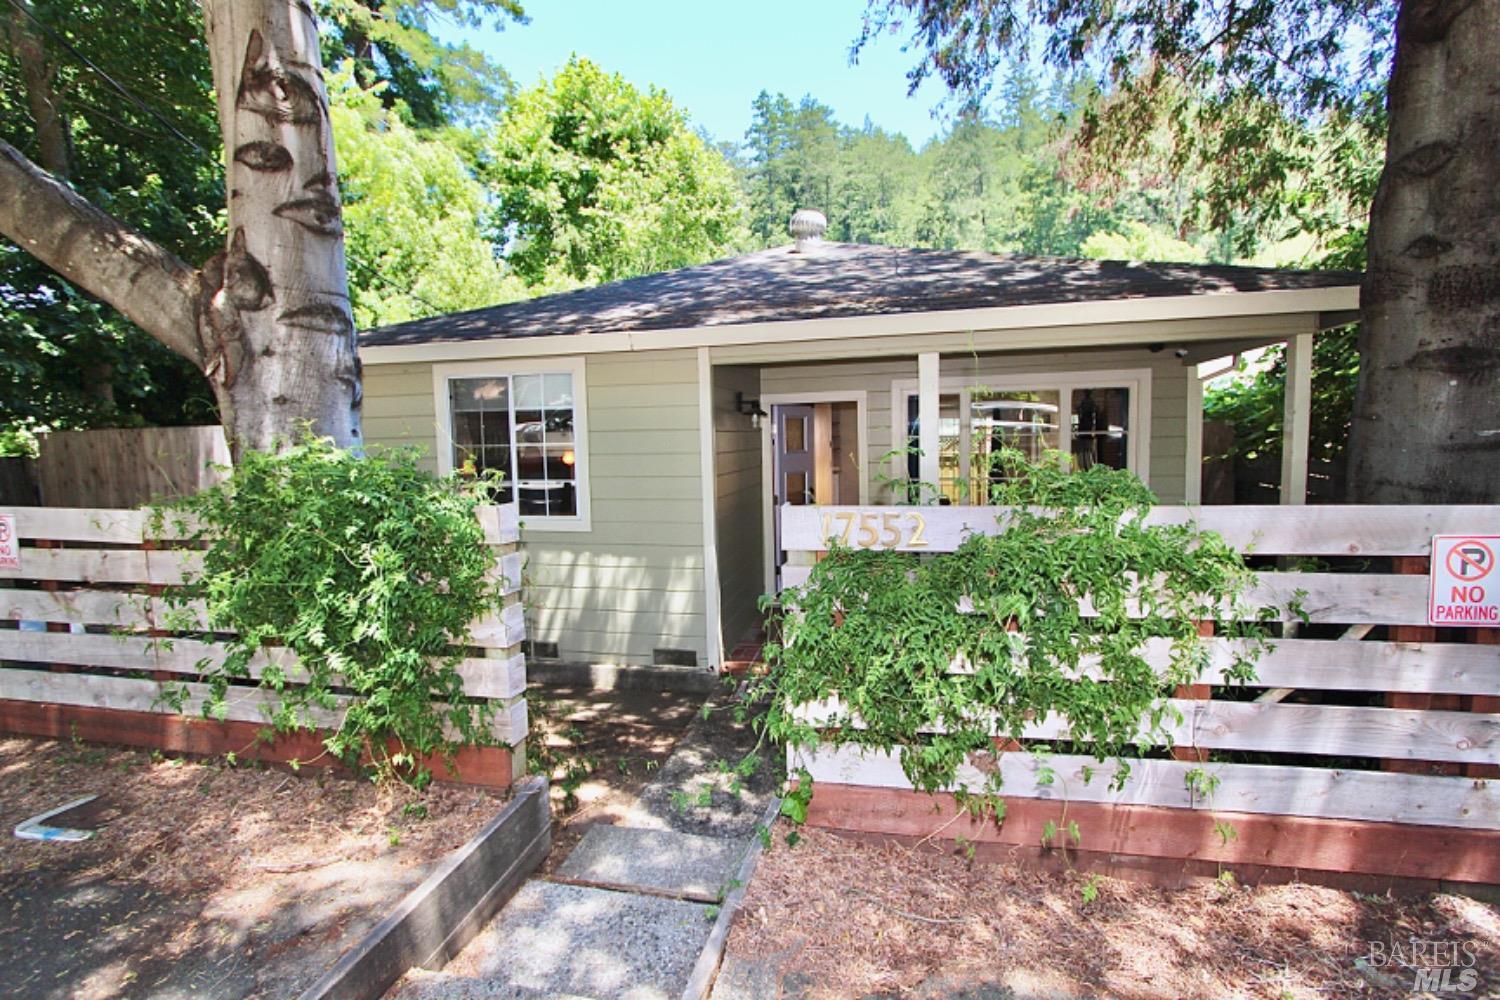 Photo of 17552 River Ln in Guerneville, CA